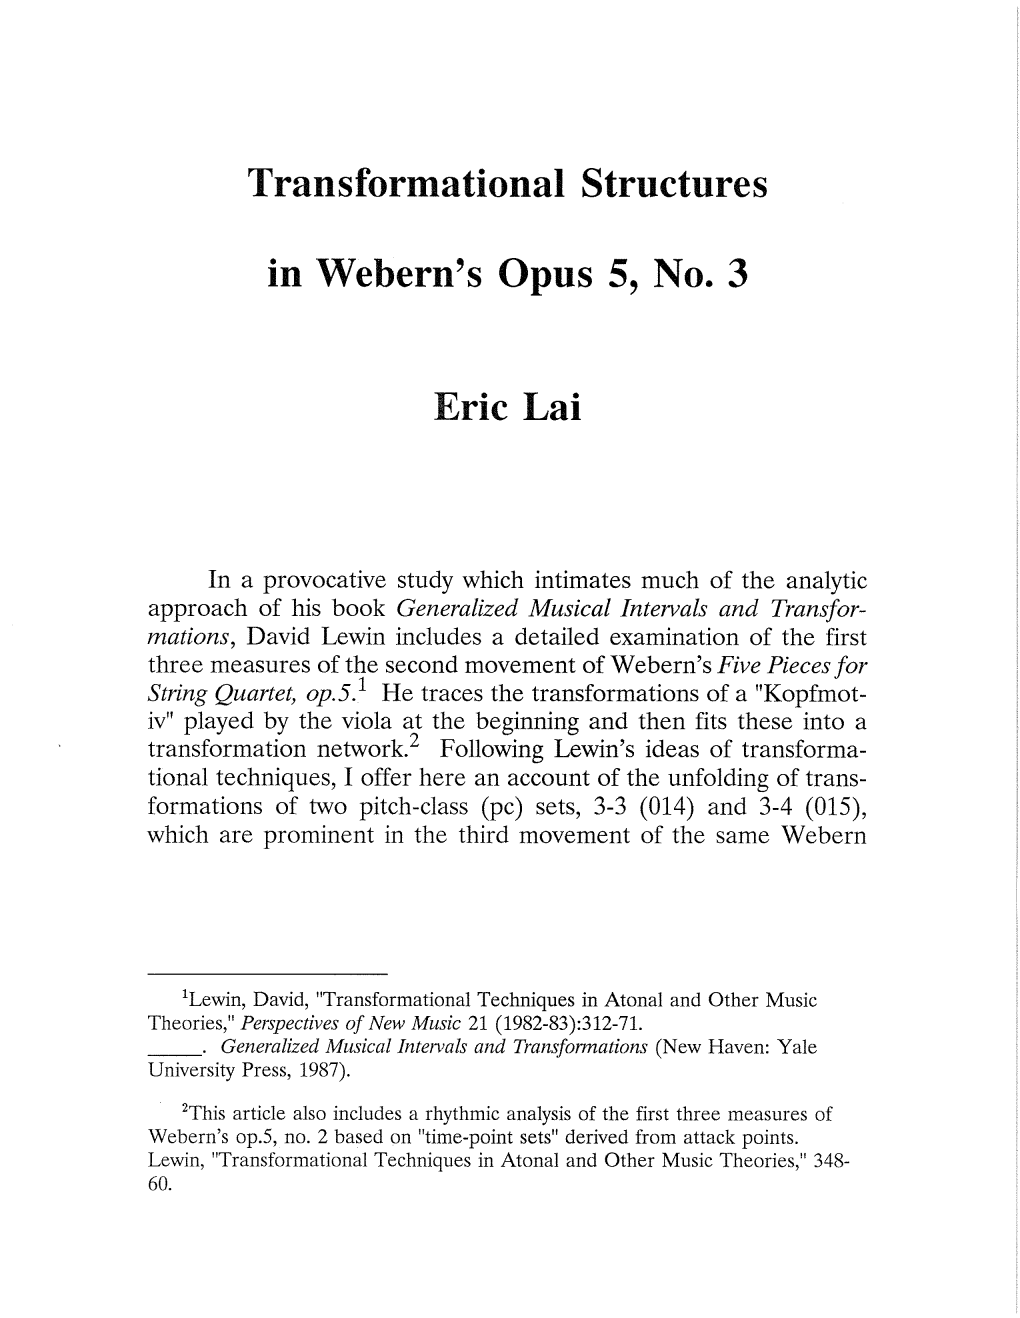 Transformational Structures in Webern's Opus 5, No.3 Eric